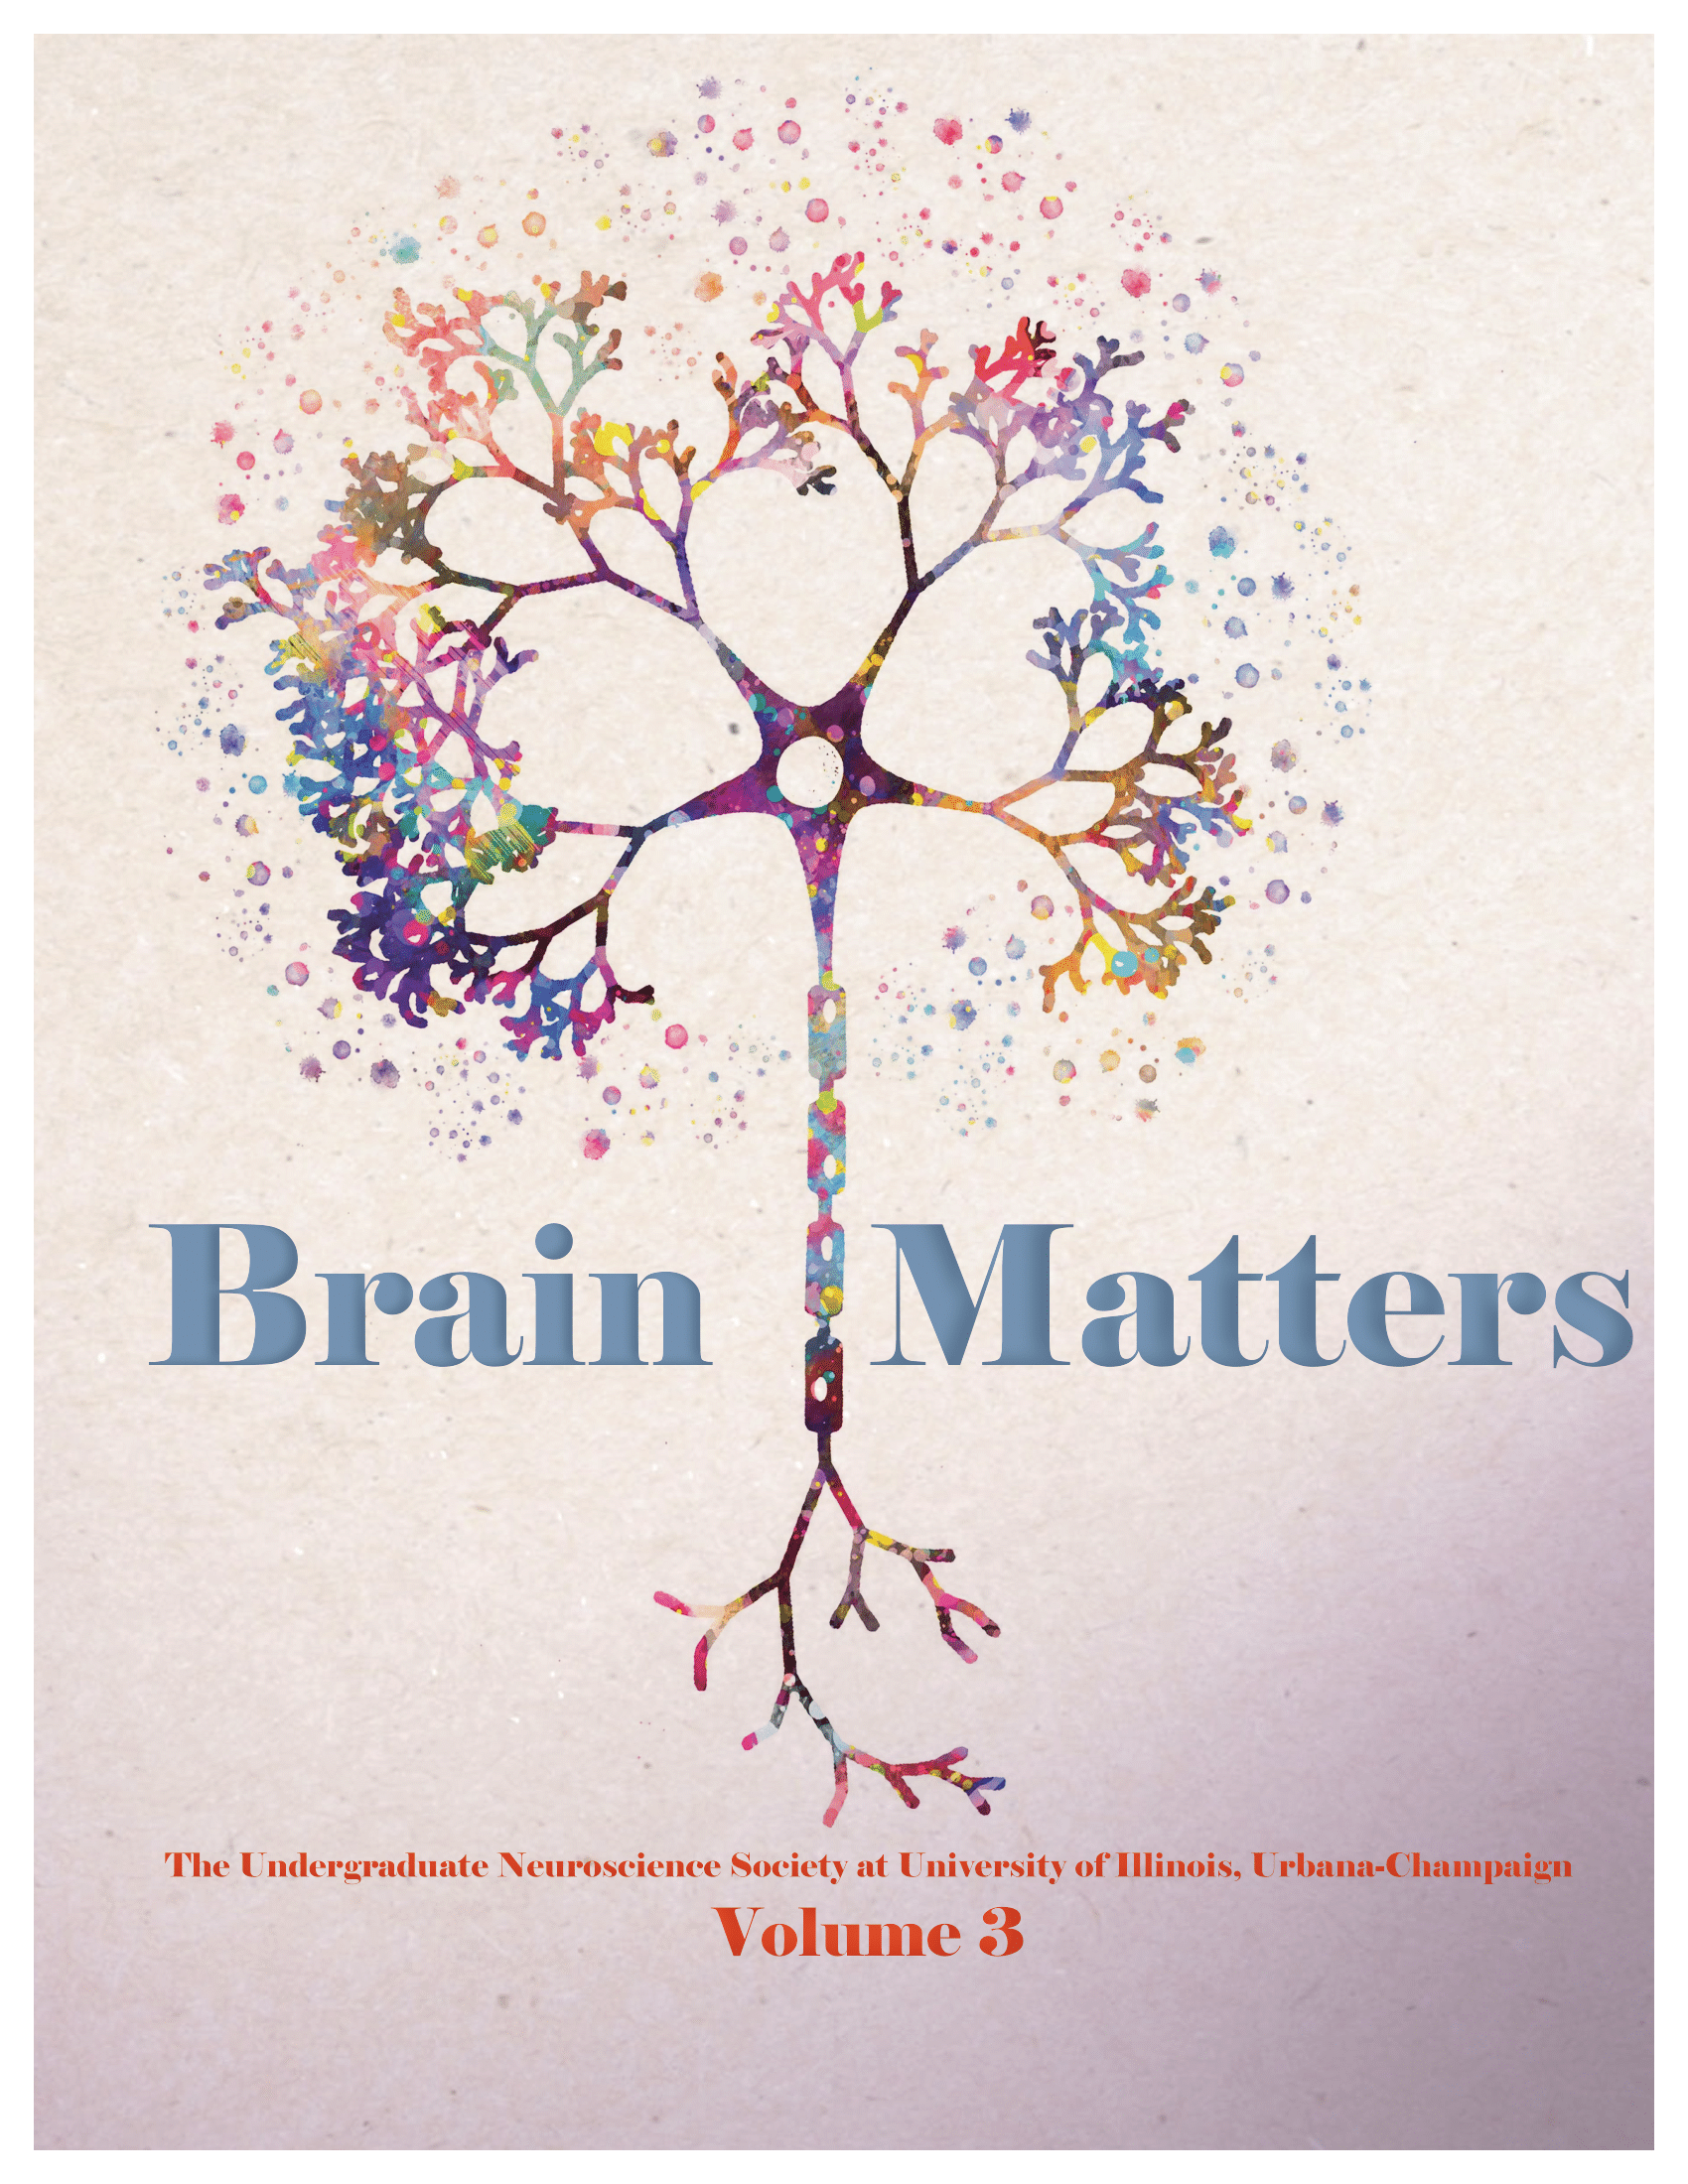 Cover Image Brain Matters Volume 3 Issue 1 2021